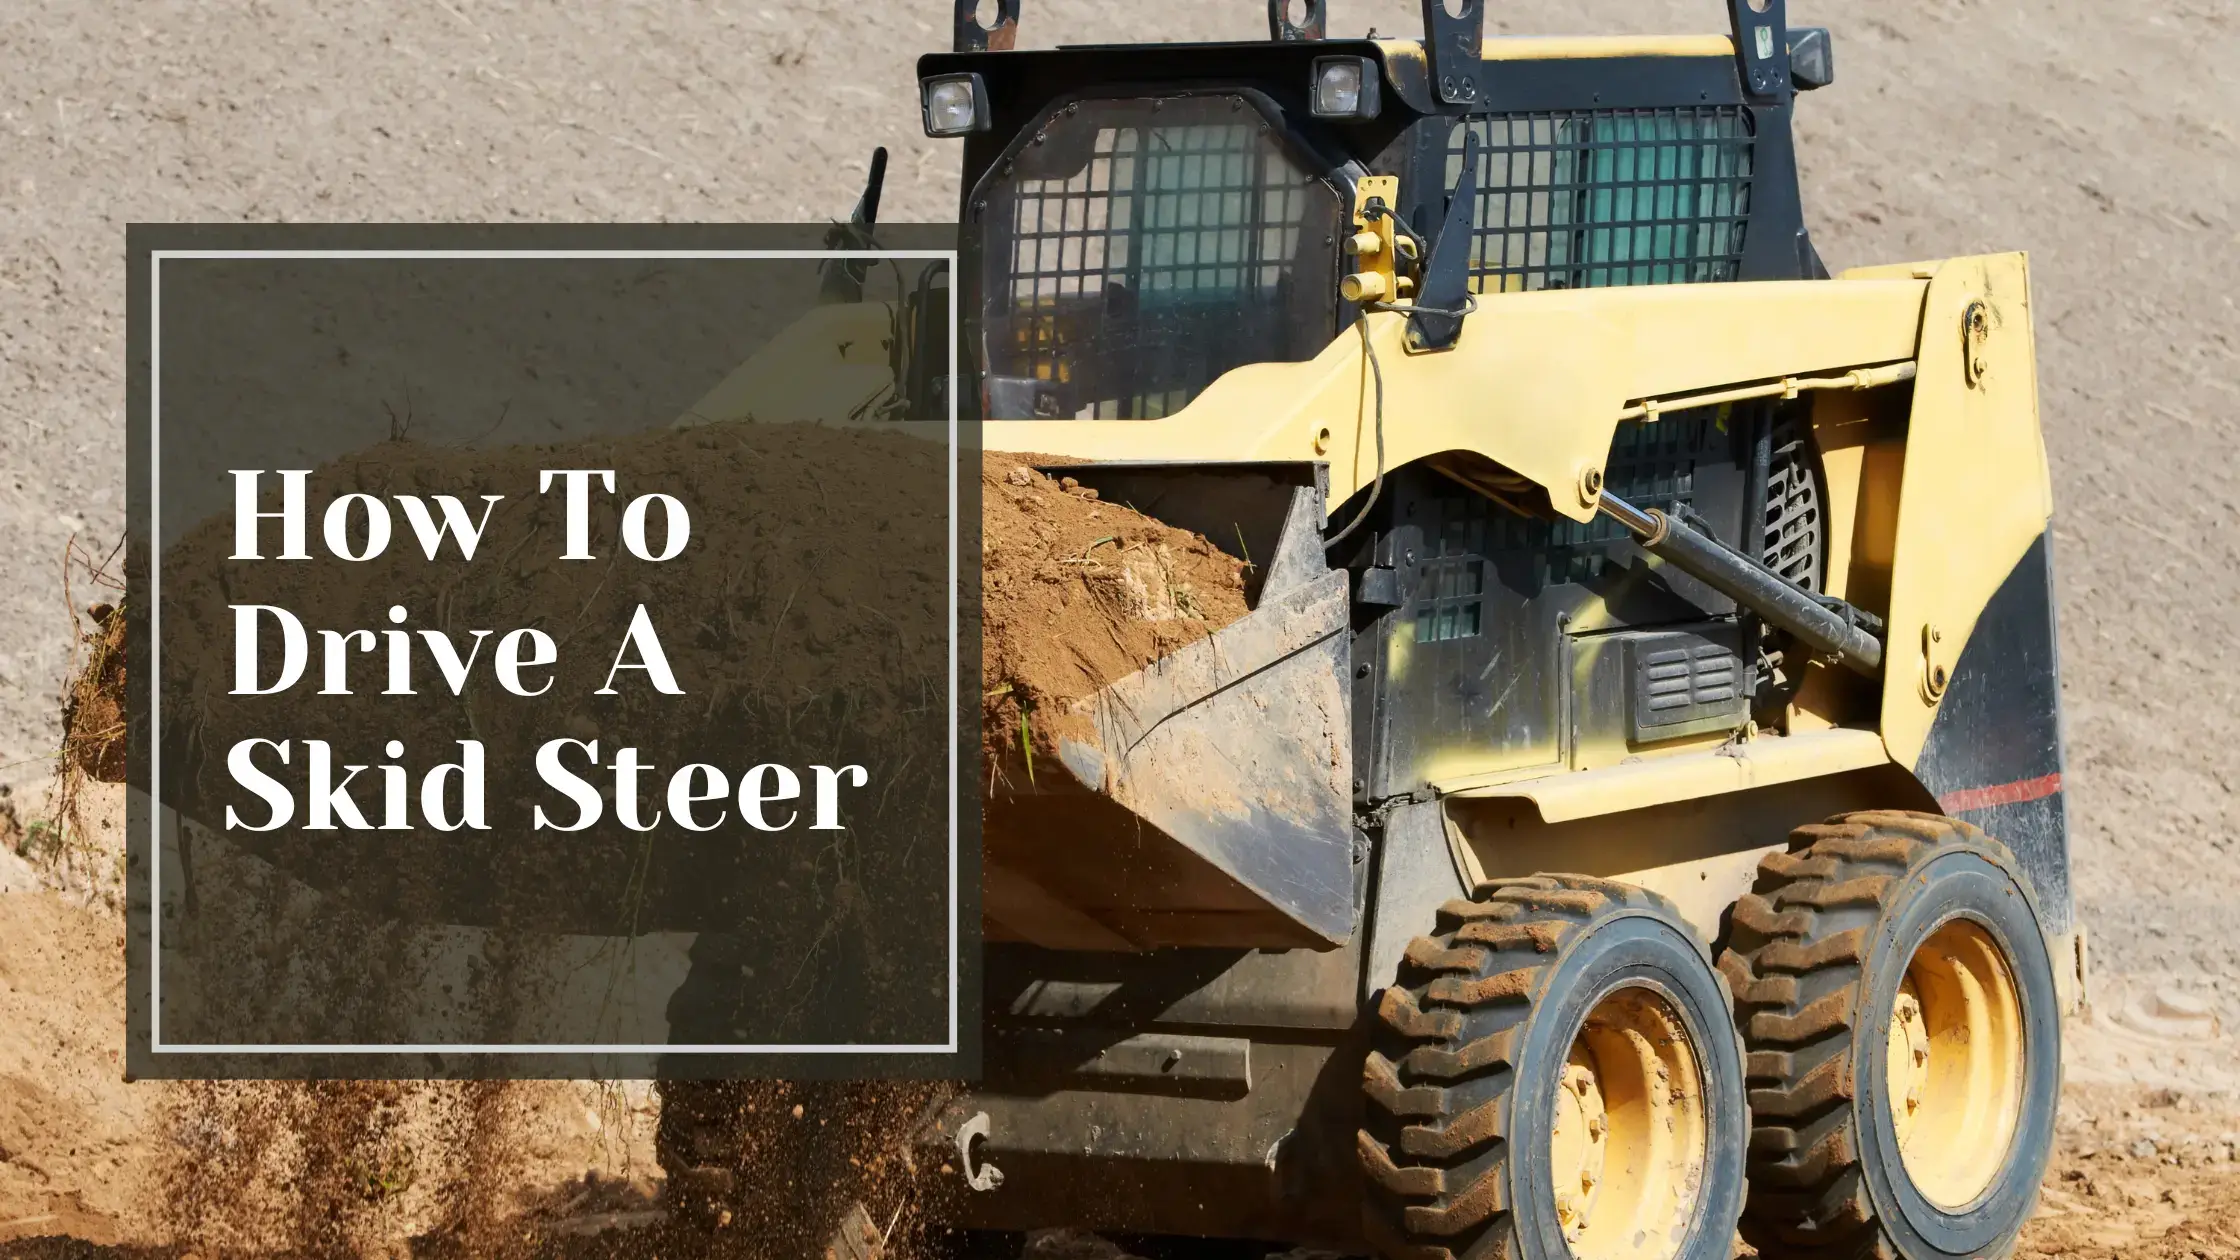 How To Drive A Skid Steer